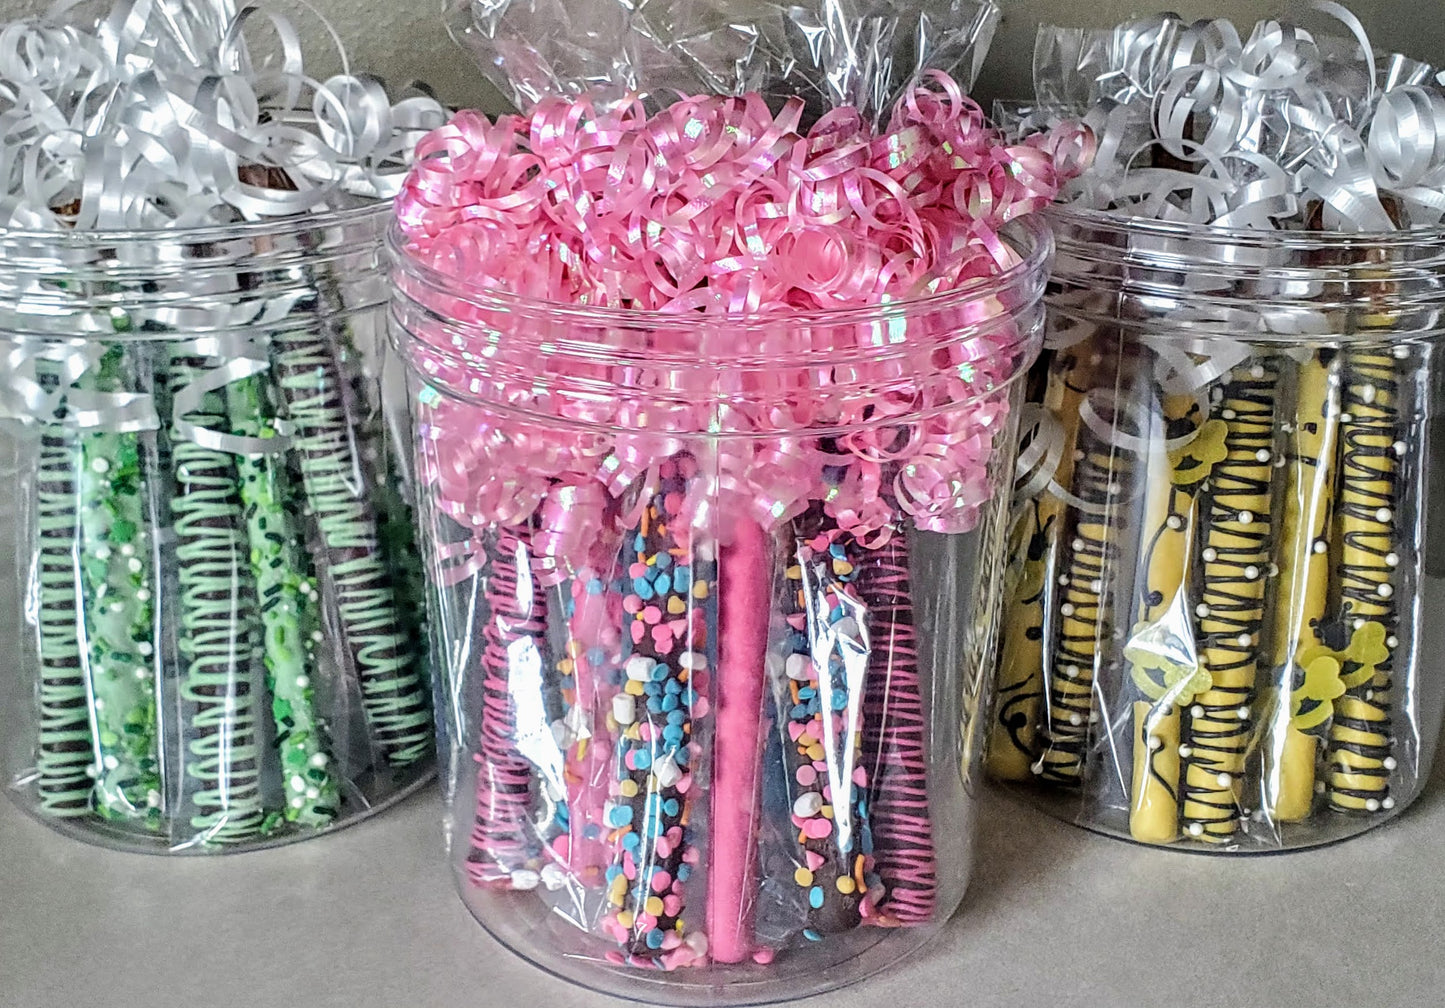 Party Favors & Double the Fun!